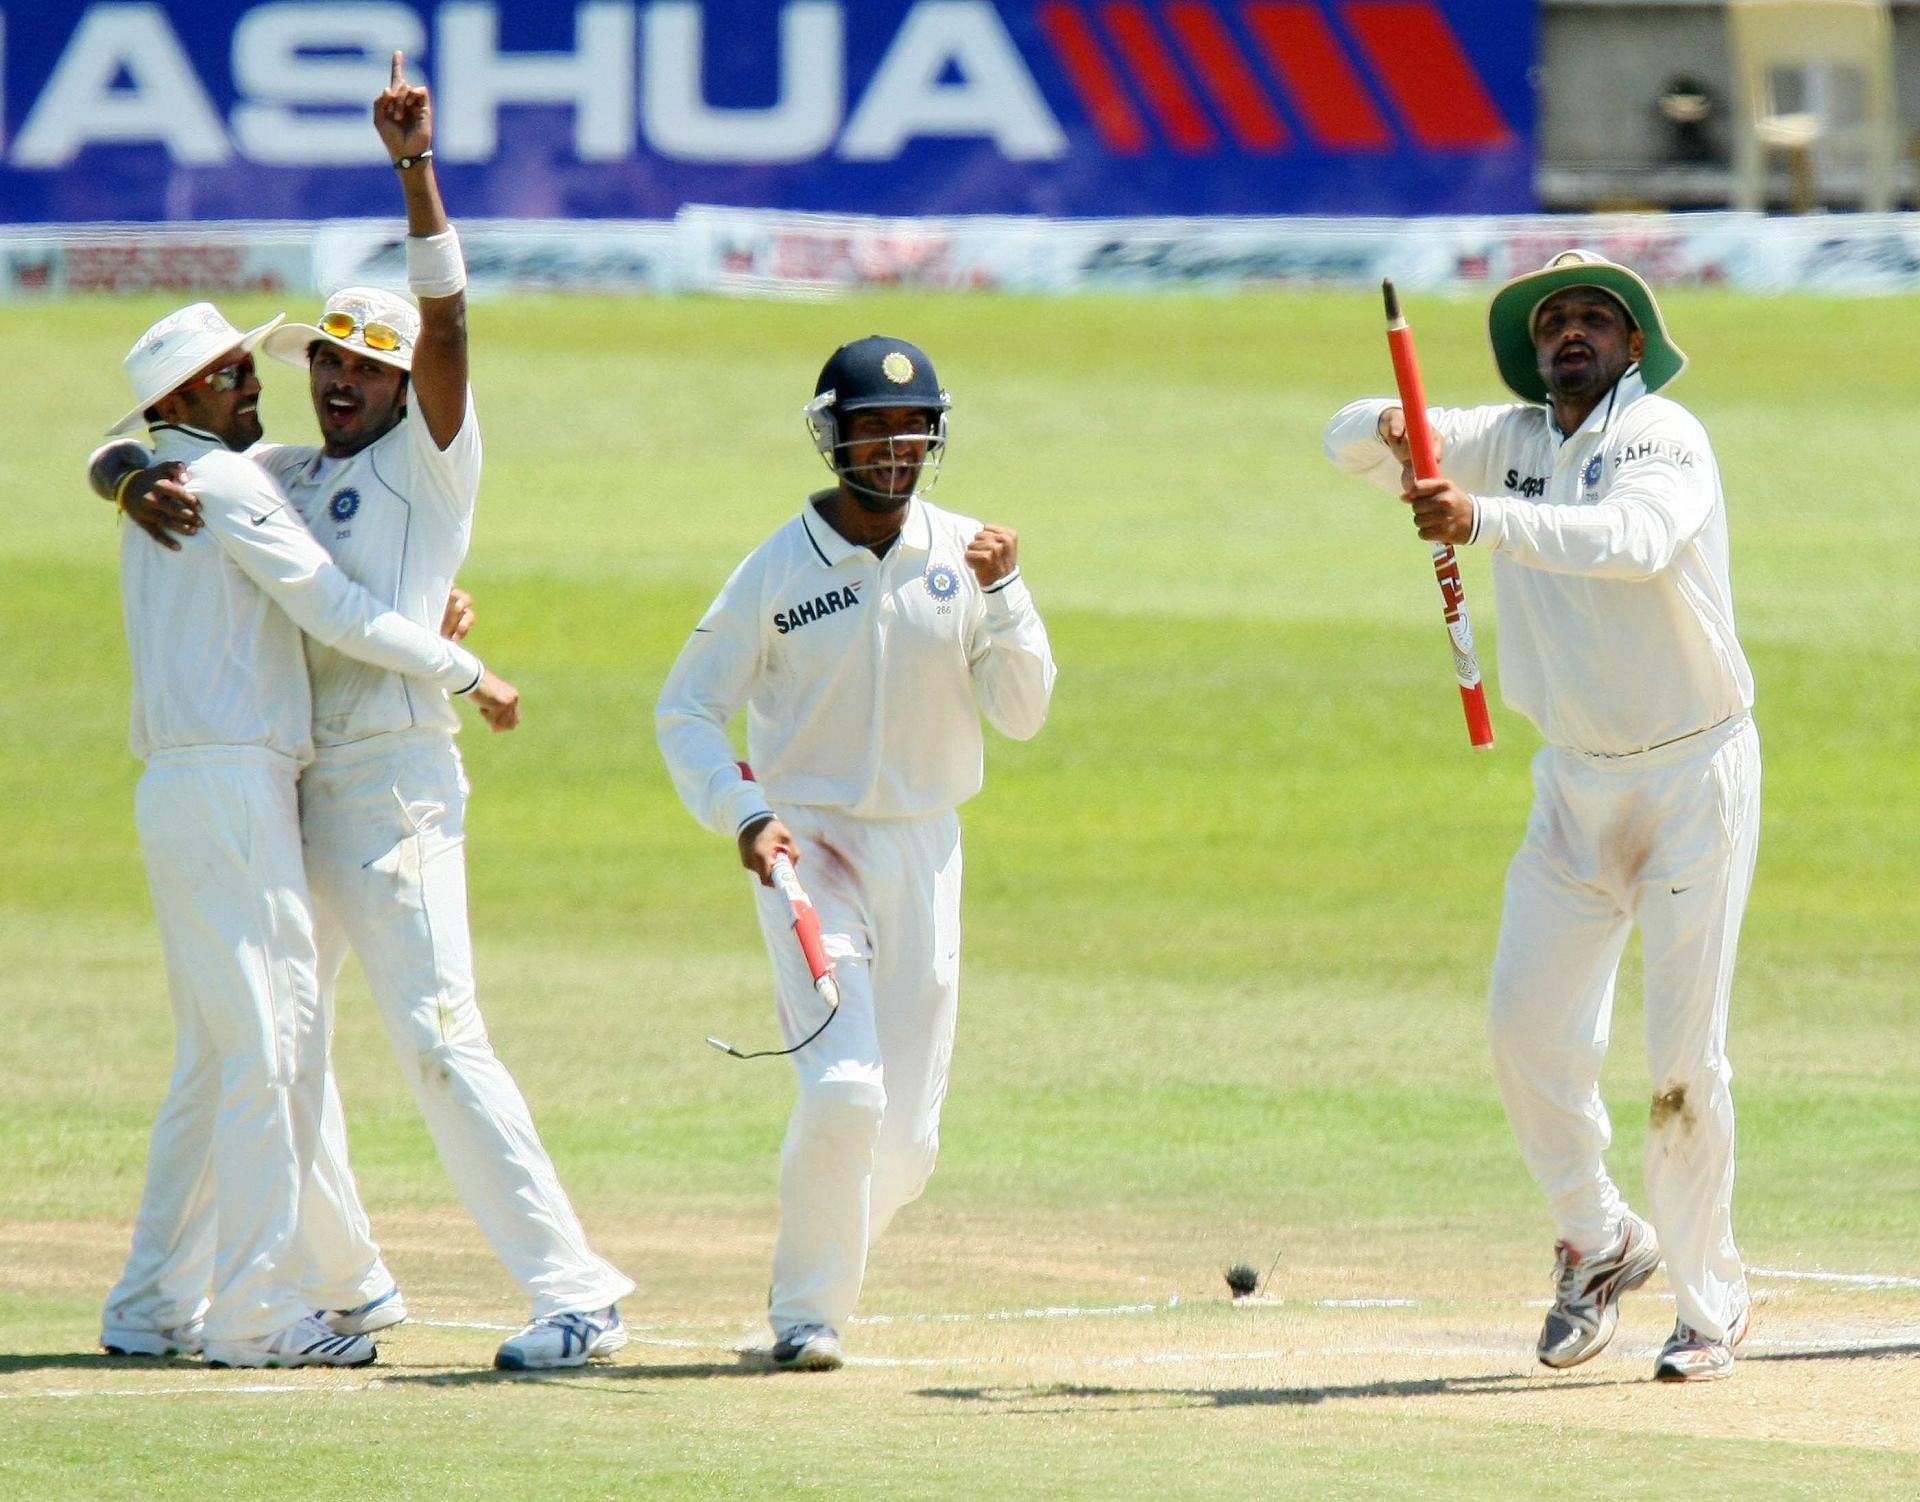 India registered a famous win in Durban in 2010. (Pic: Getty Images)